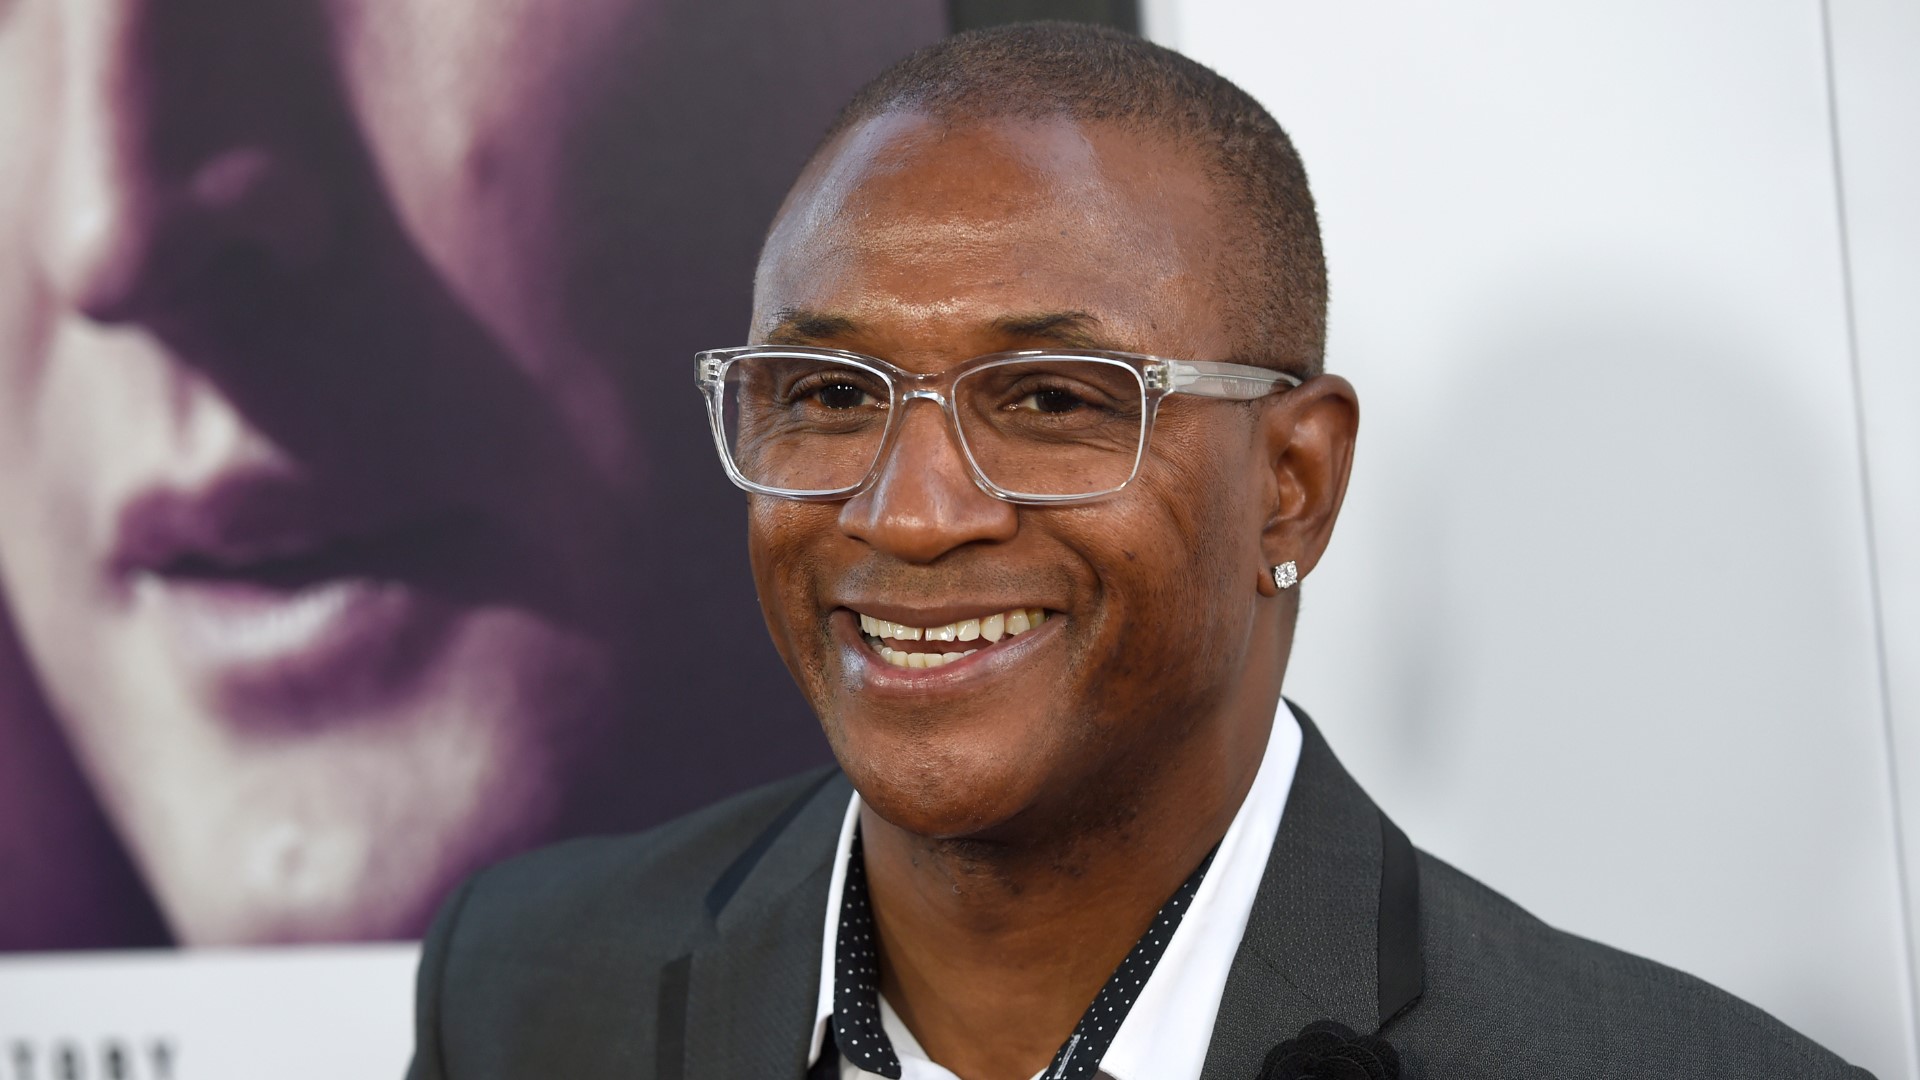 Tommy Davidson was in DC today to visit some of his old stomping grounds including Ben's Chili Bowl where he says its time to add his face to the Wall of fame outside Ben's .